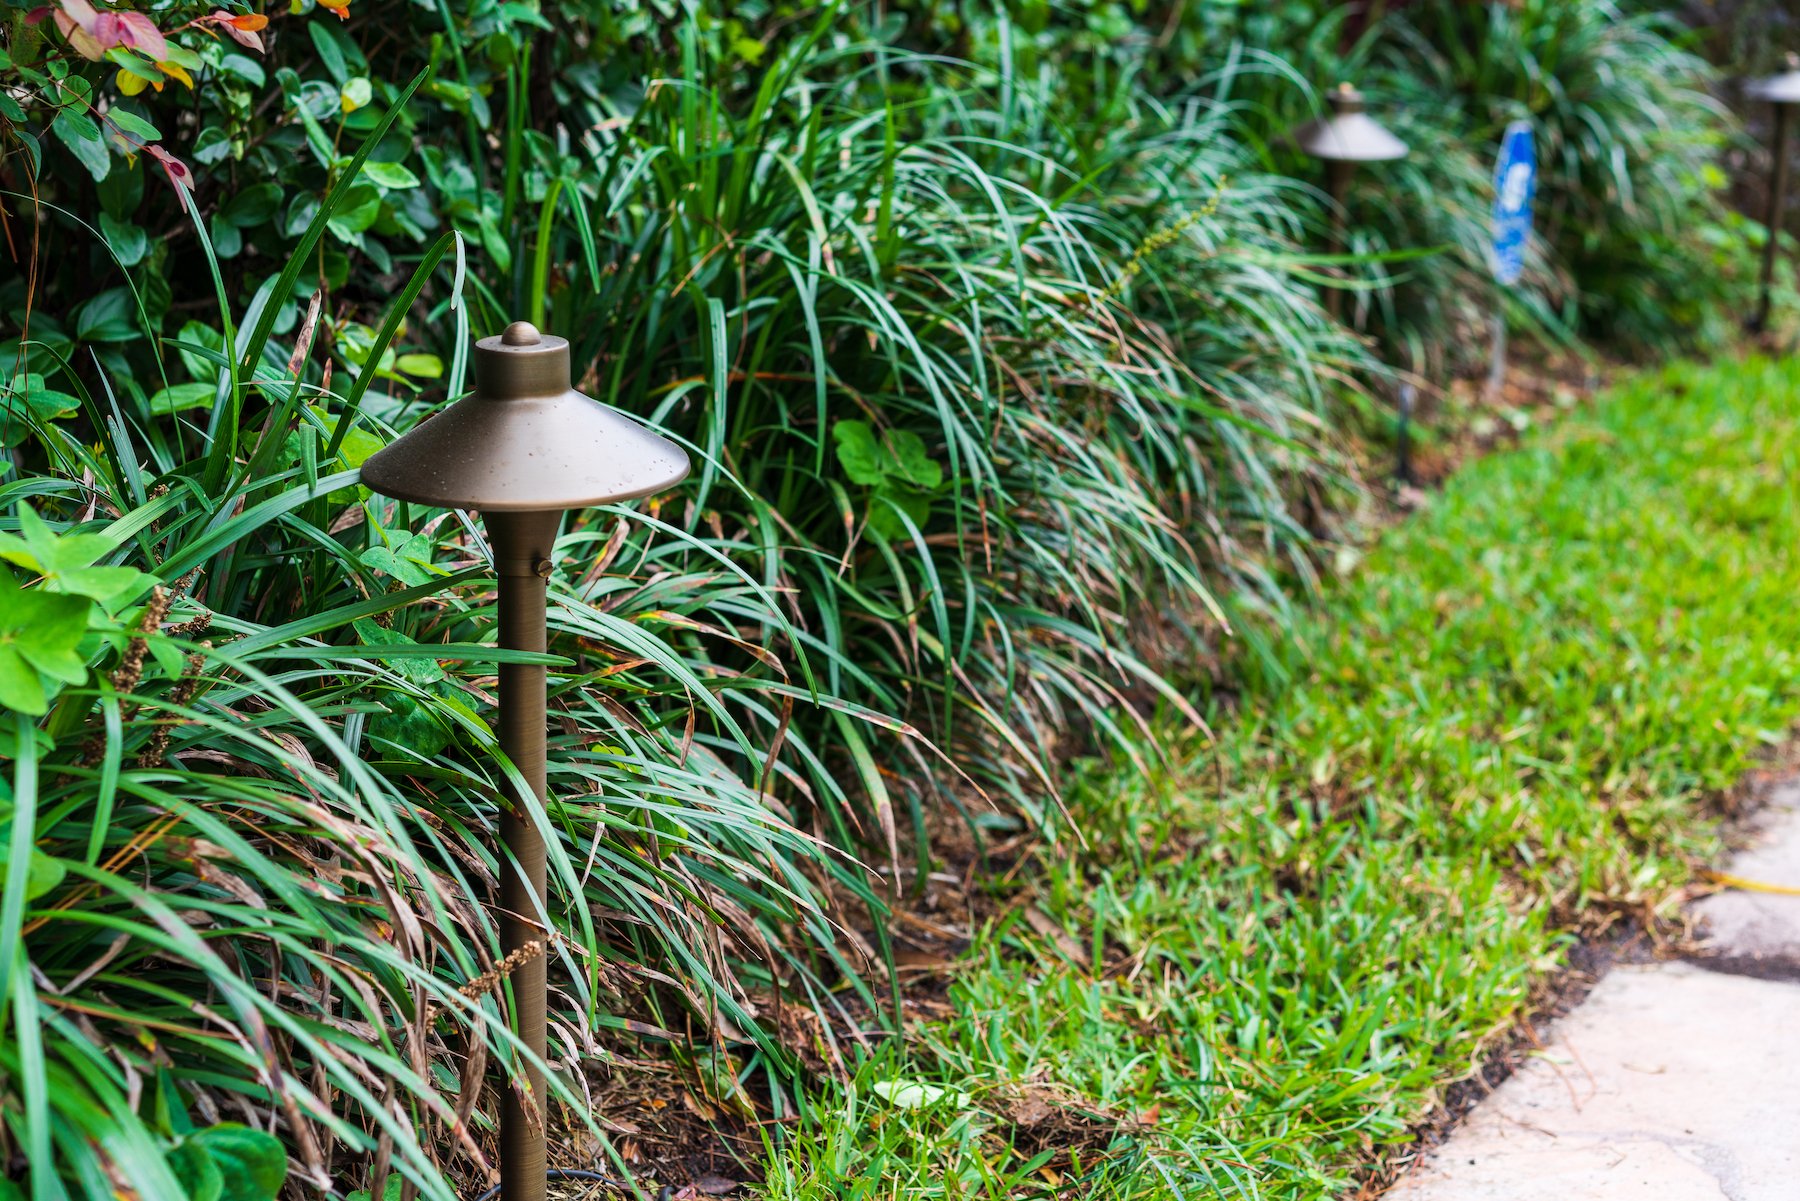 landscape lighting fixtures in a planting bed